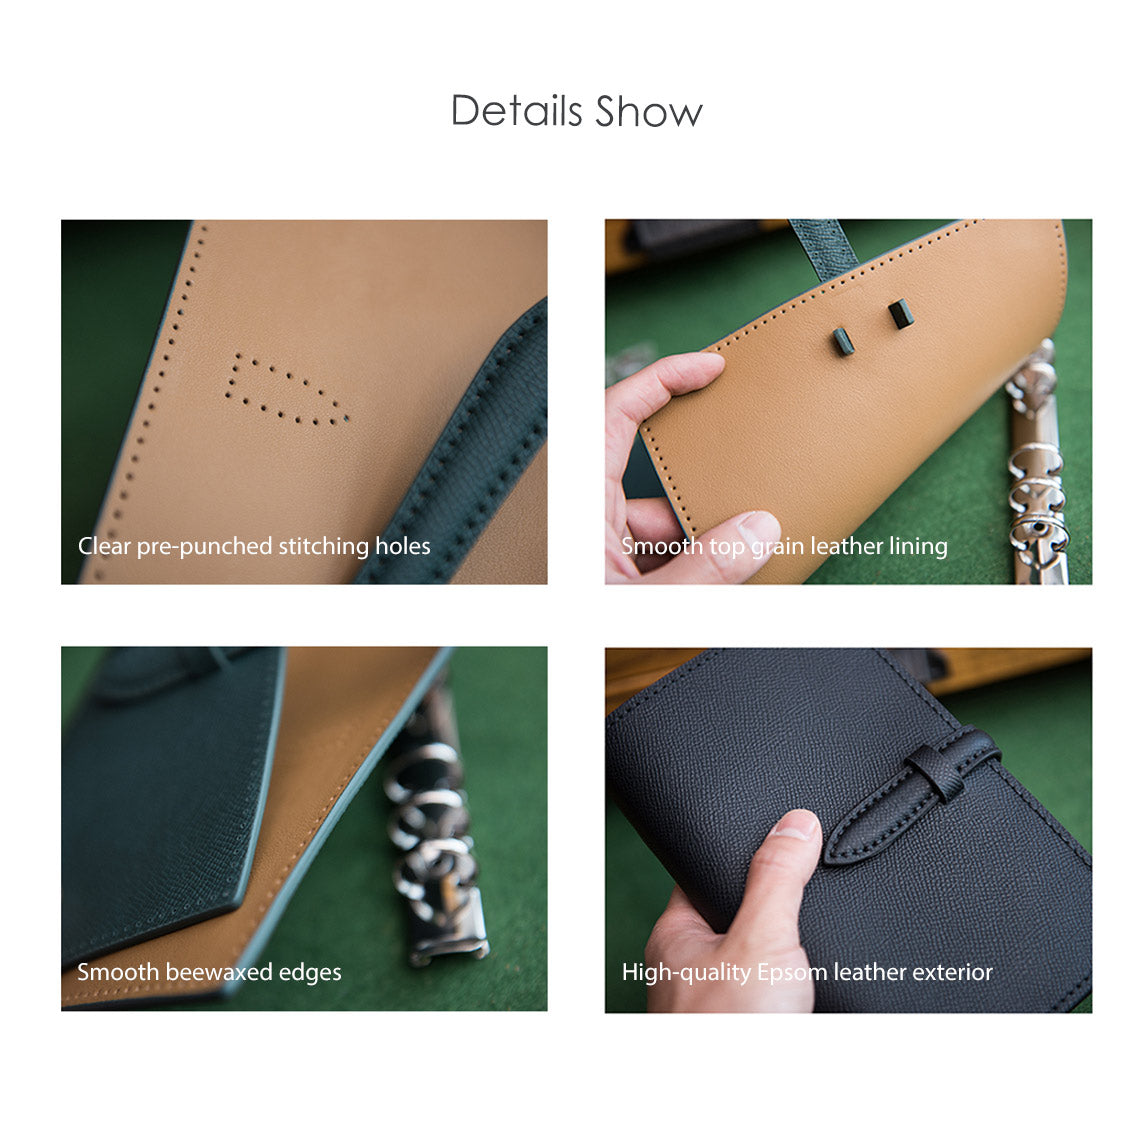 Leather Cover for Notebook | Full Grain Leather A6 Notebook Cover DIY Kit Make Your Own - POPSEWING™